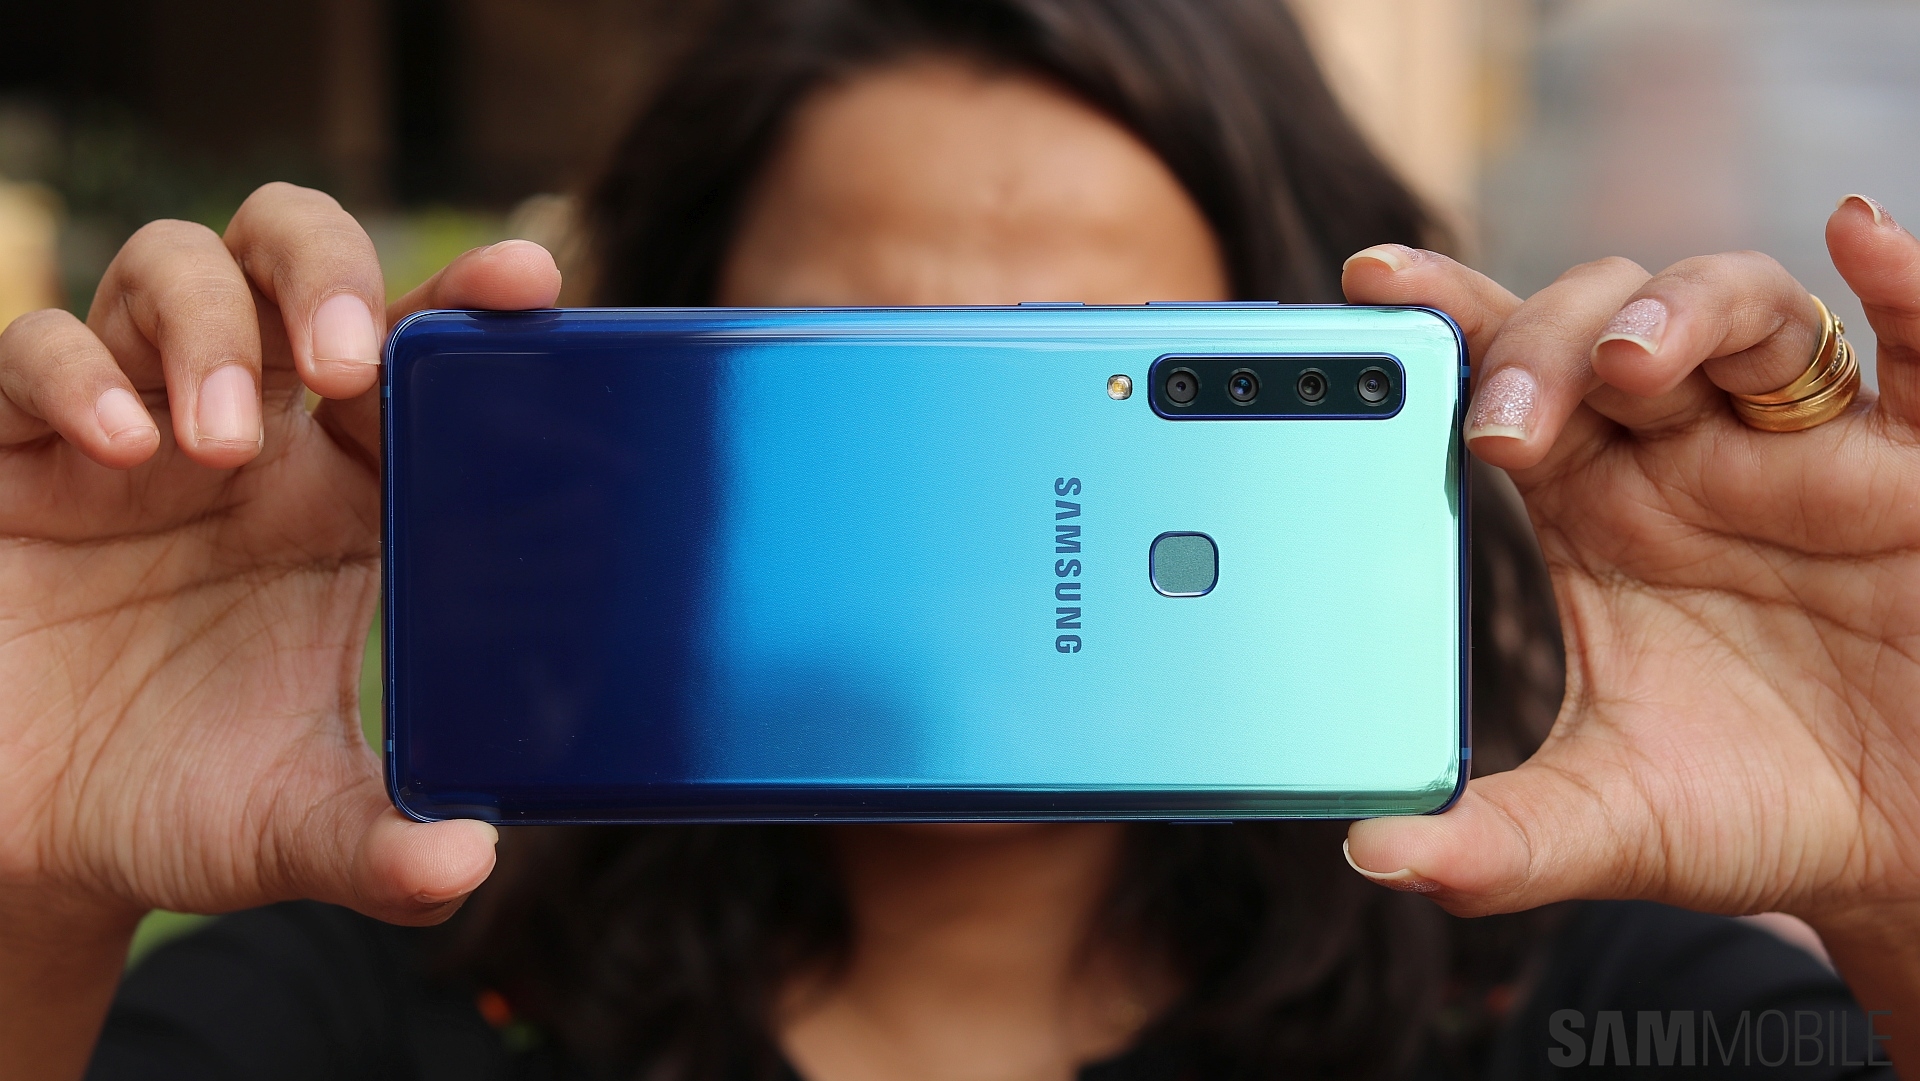 Samsung Galaxy A9 2018 Review